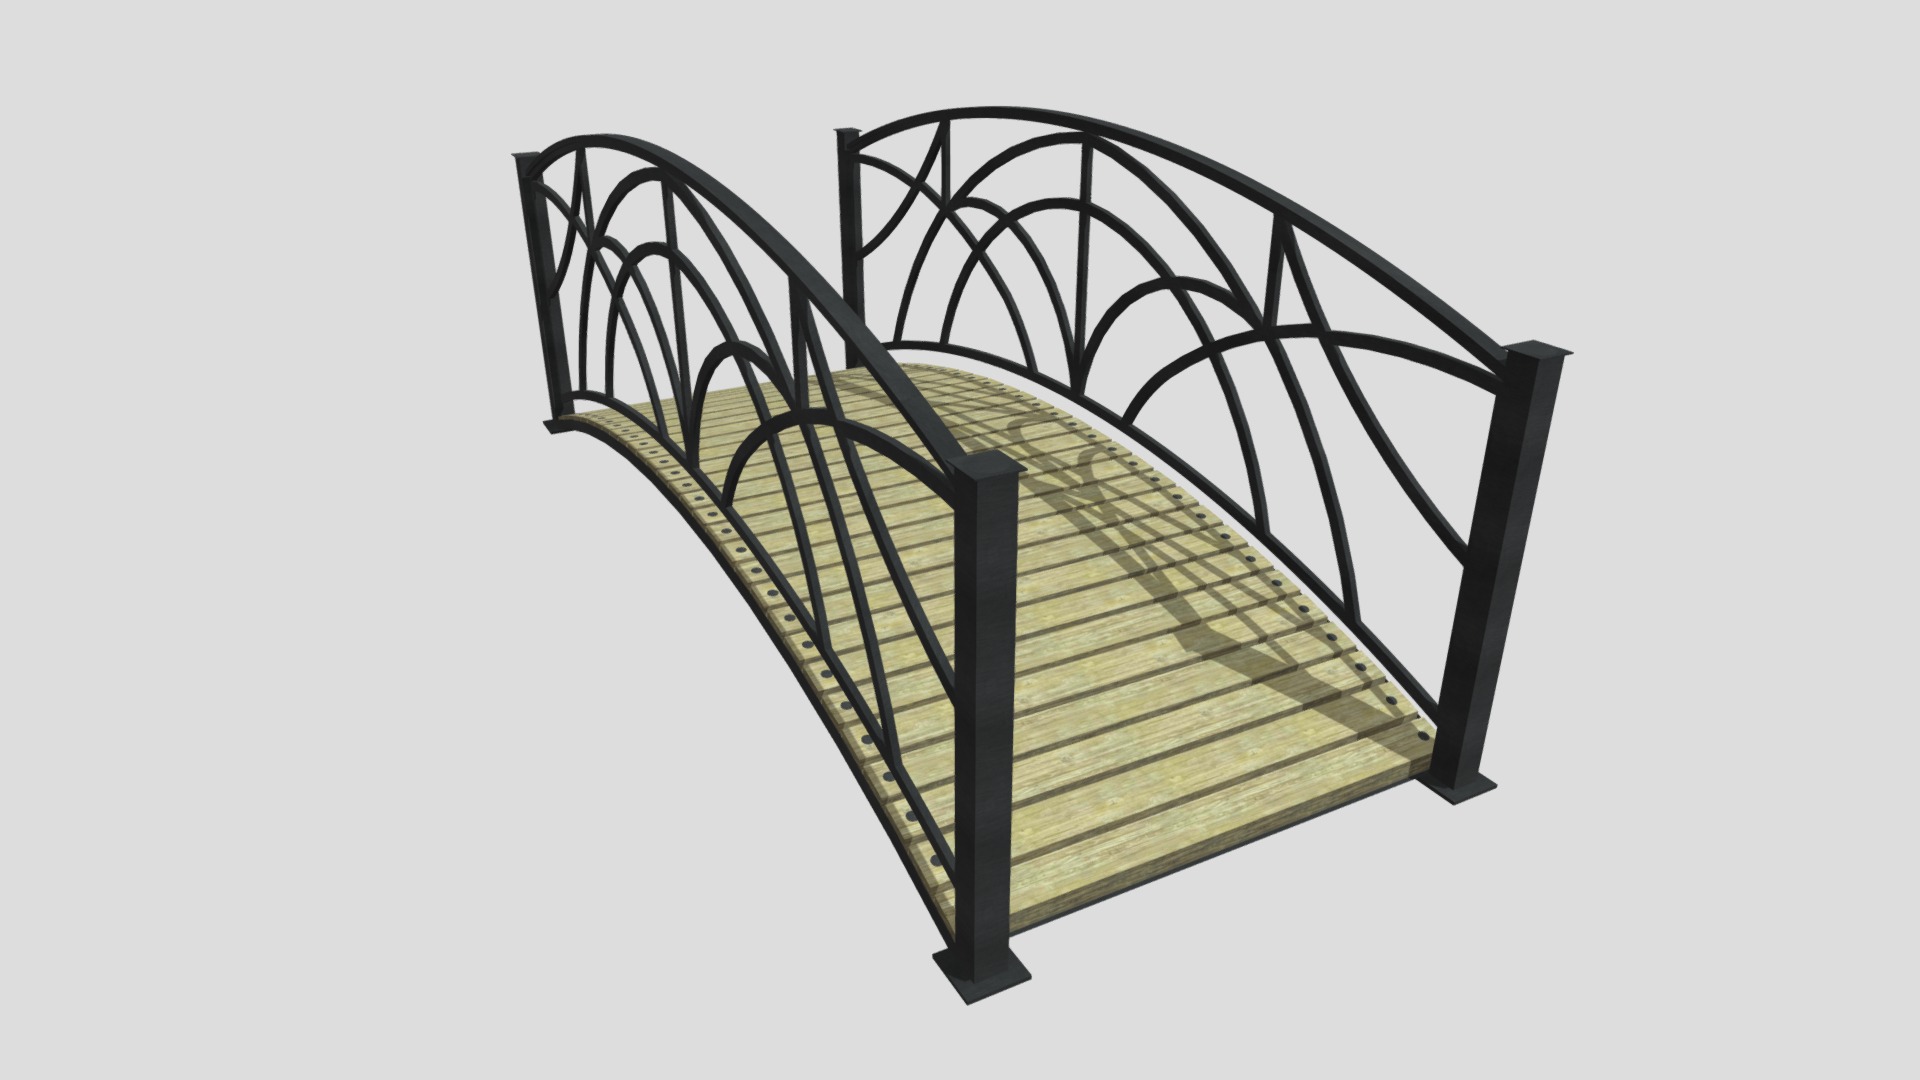 3D model Bridge - This is a 3D model of the Bridge. The 3D model is about a basketball hoop with a net.